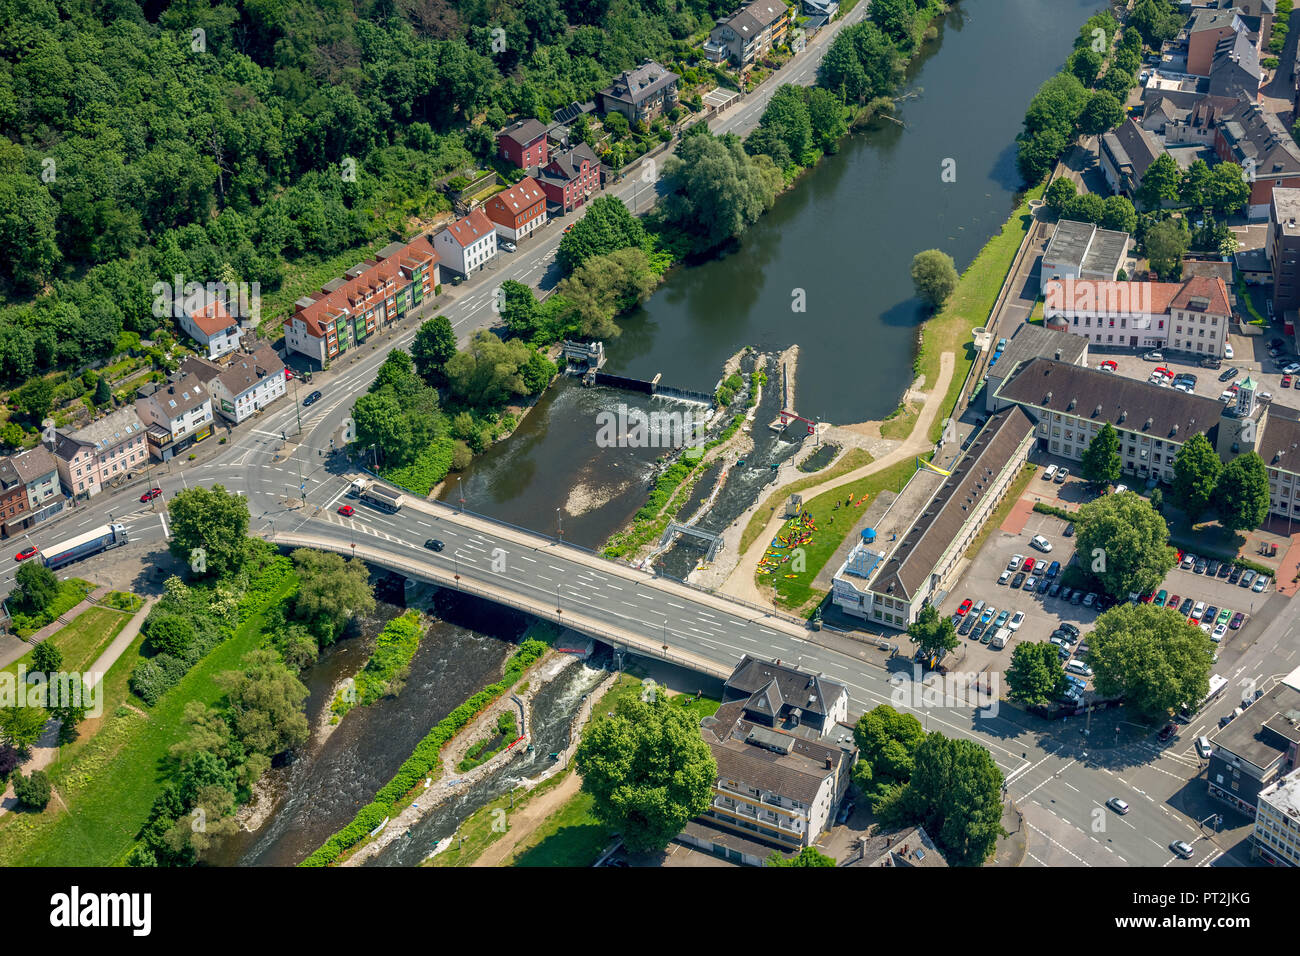 Whitewater course on the Lenne, the Bentheimer and the town hall Hohenlimburg, district administration, police station Hohenlimburg, Hohenlimburg center, center, Hagen, Ruhr area, North Rhine-Westphalia, Germany Stock Photo